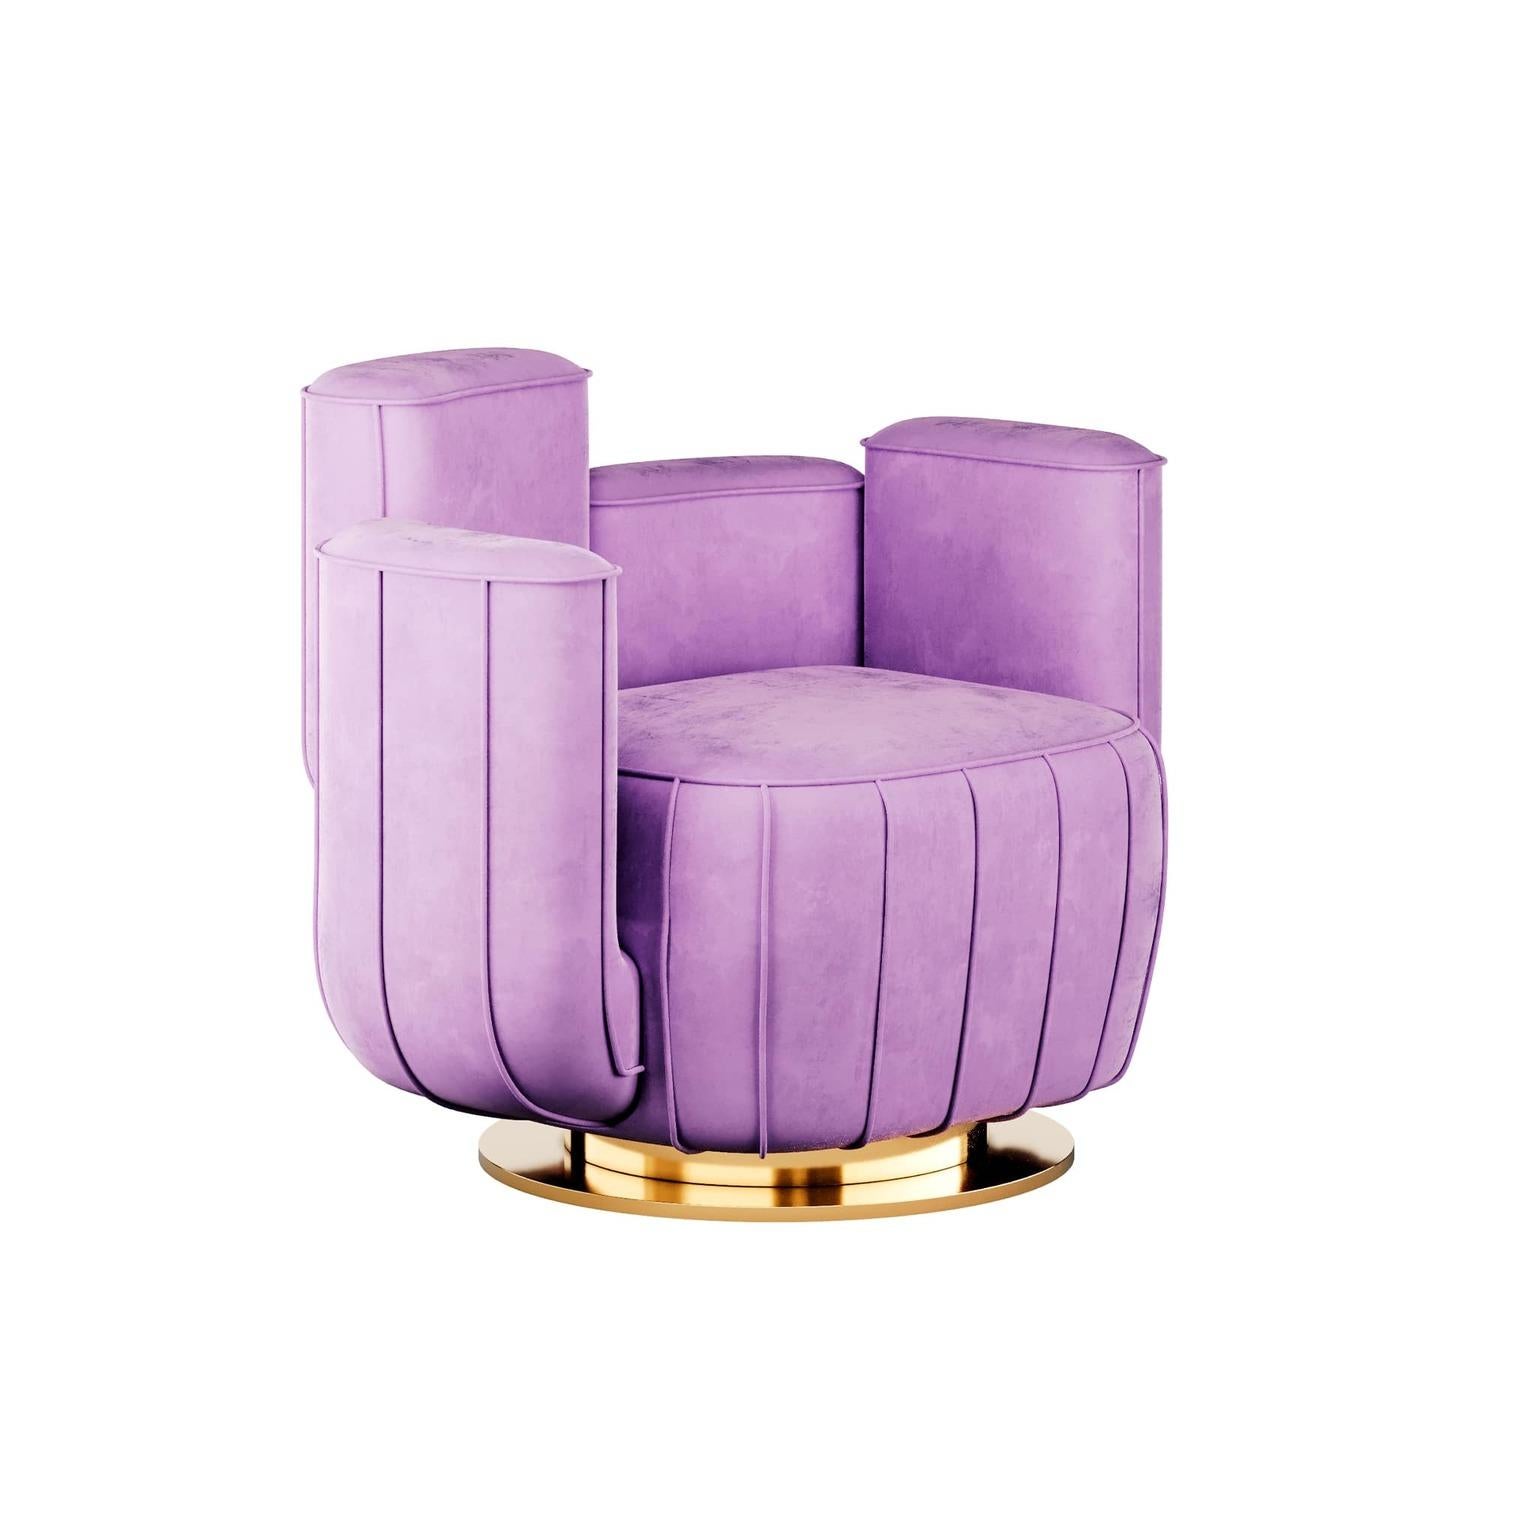 Modern lavender ilac velvet armchair cactus shape with gold plated swivel base

Ajui Lavendar / Lilac Armchair is a luxury armchair with an artsy interpretation of a cactus and a swivel base. It is upholstered in velvet with a structure and base